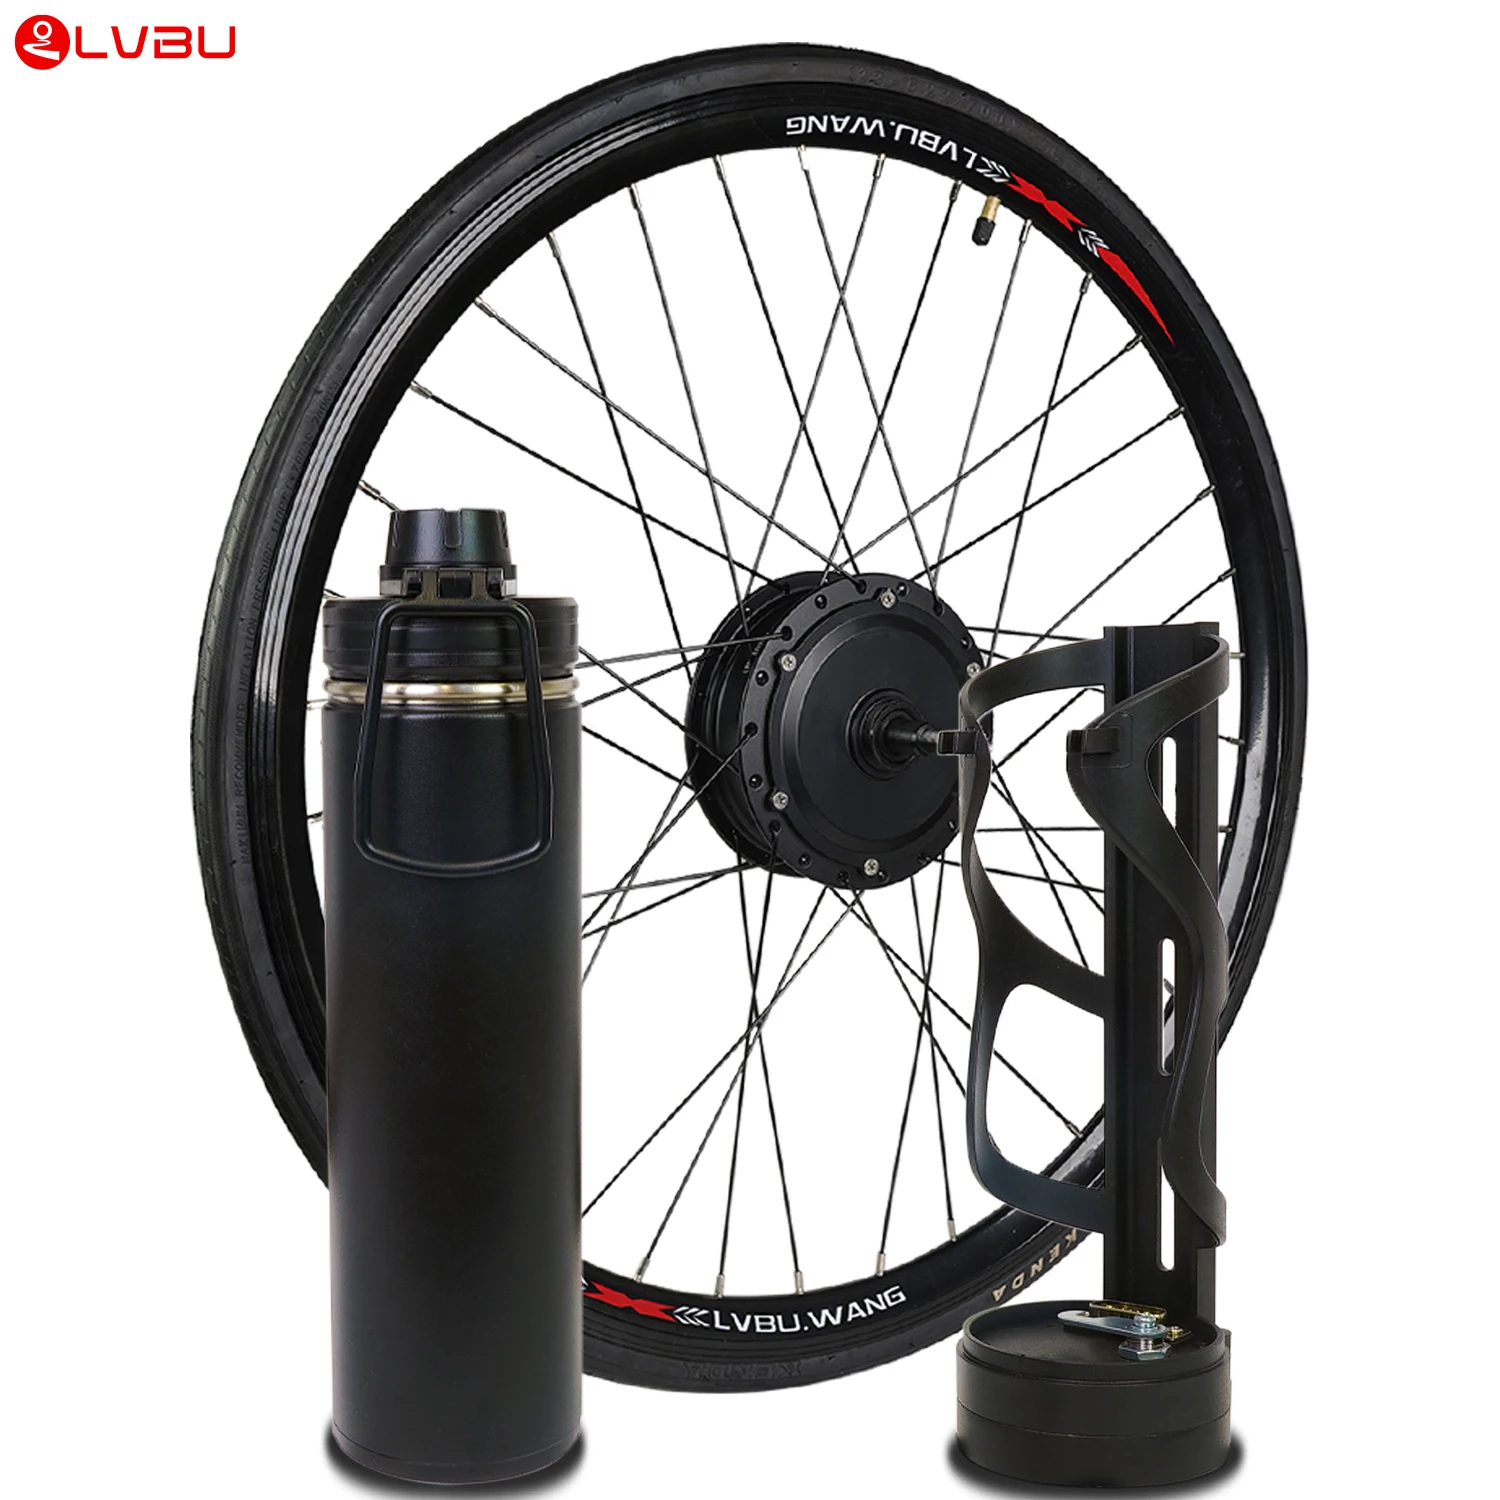 

16" 20" 24" 26" 27.5" 700c 28" 29" Brushless Direct Hub Motor Electric Bike Conversion Kit with Lithium Battery included